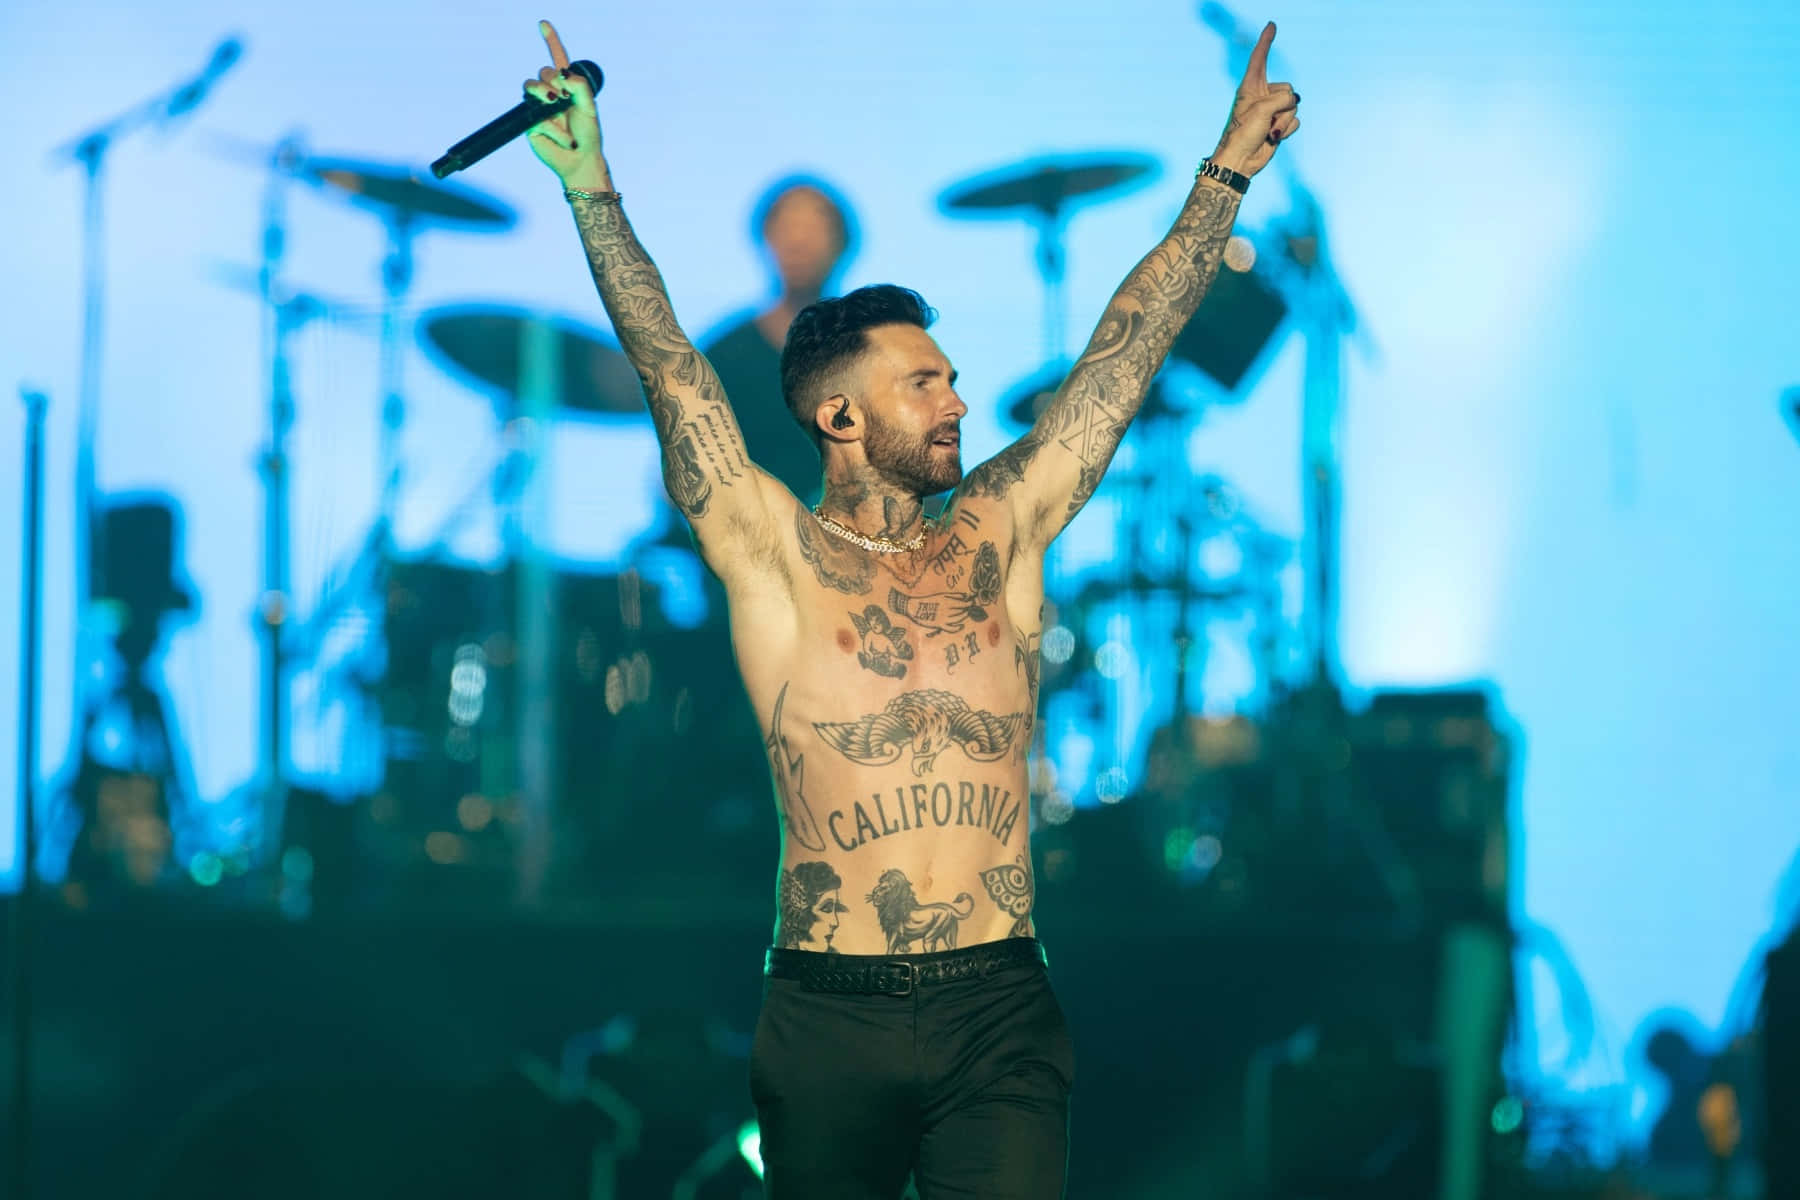 A Man With Tattoos On His Chest And Arms On Stage